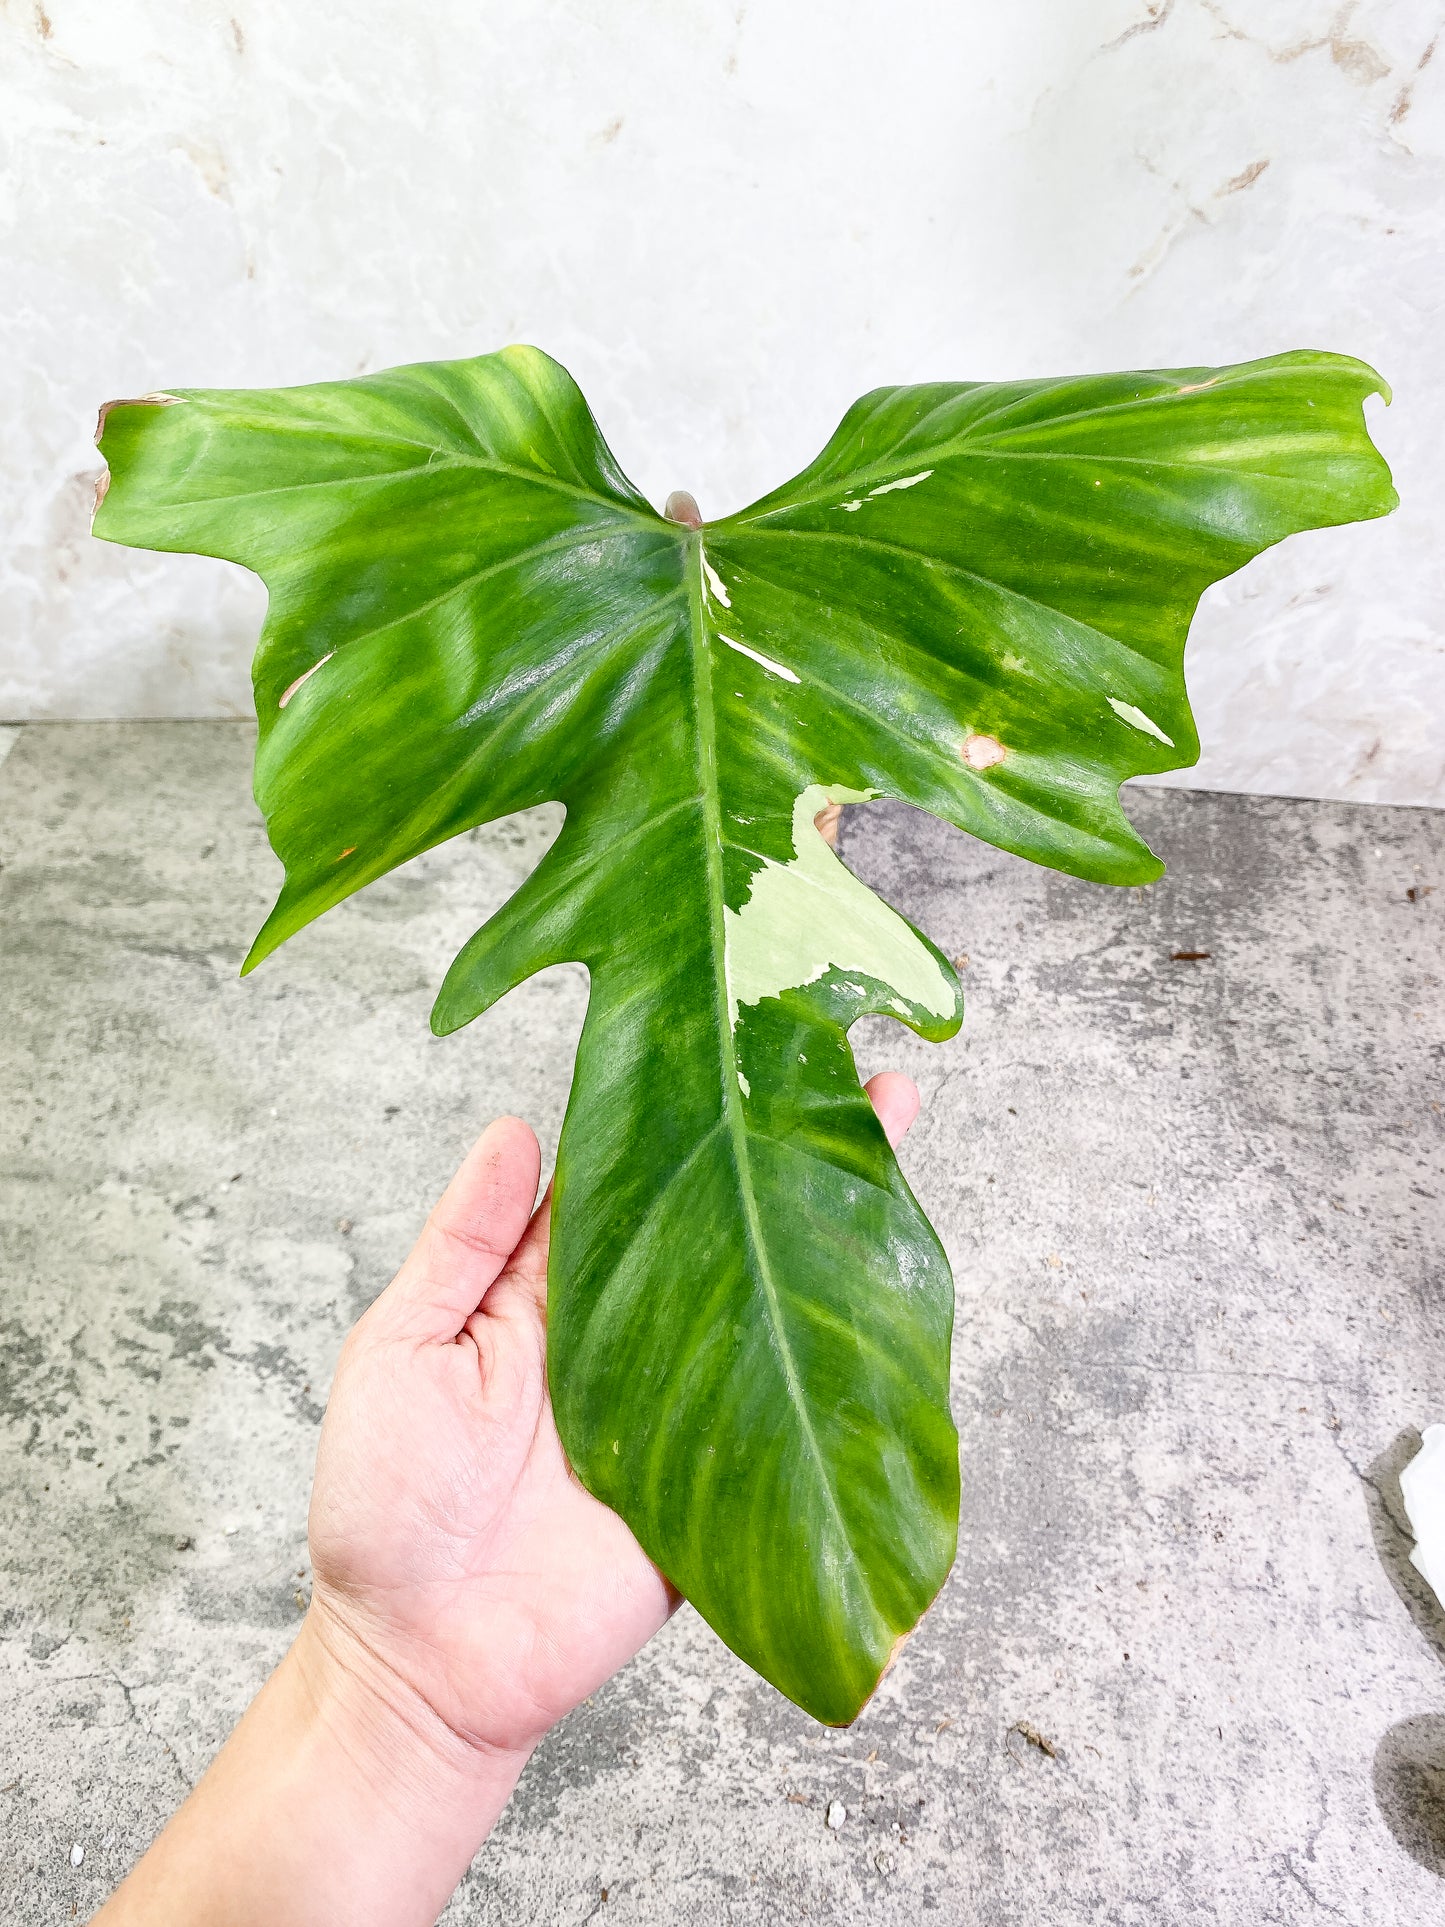 Philodendron Golden Dragon Variegated 1 leaf (13.5" long) 1 new highly Variegated leaf is unfurling 1 tc sprout 1 extra bud Rooted